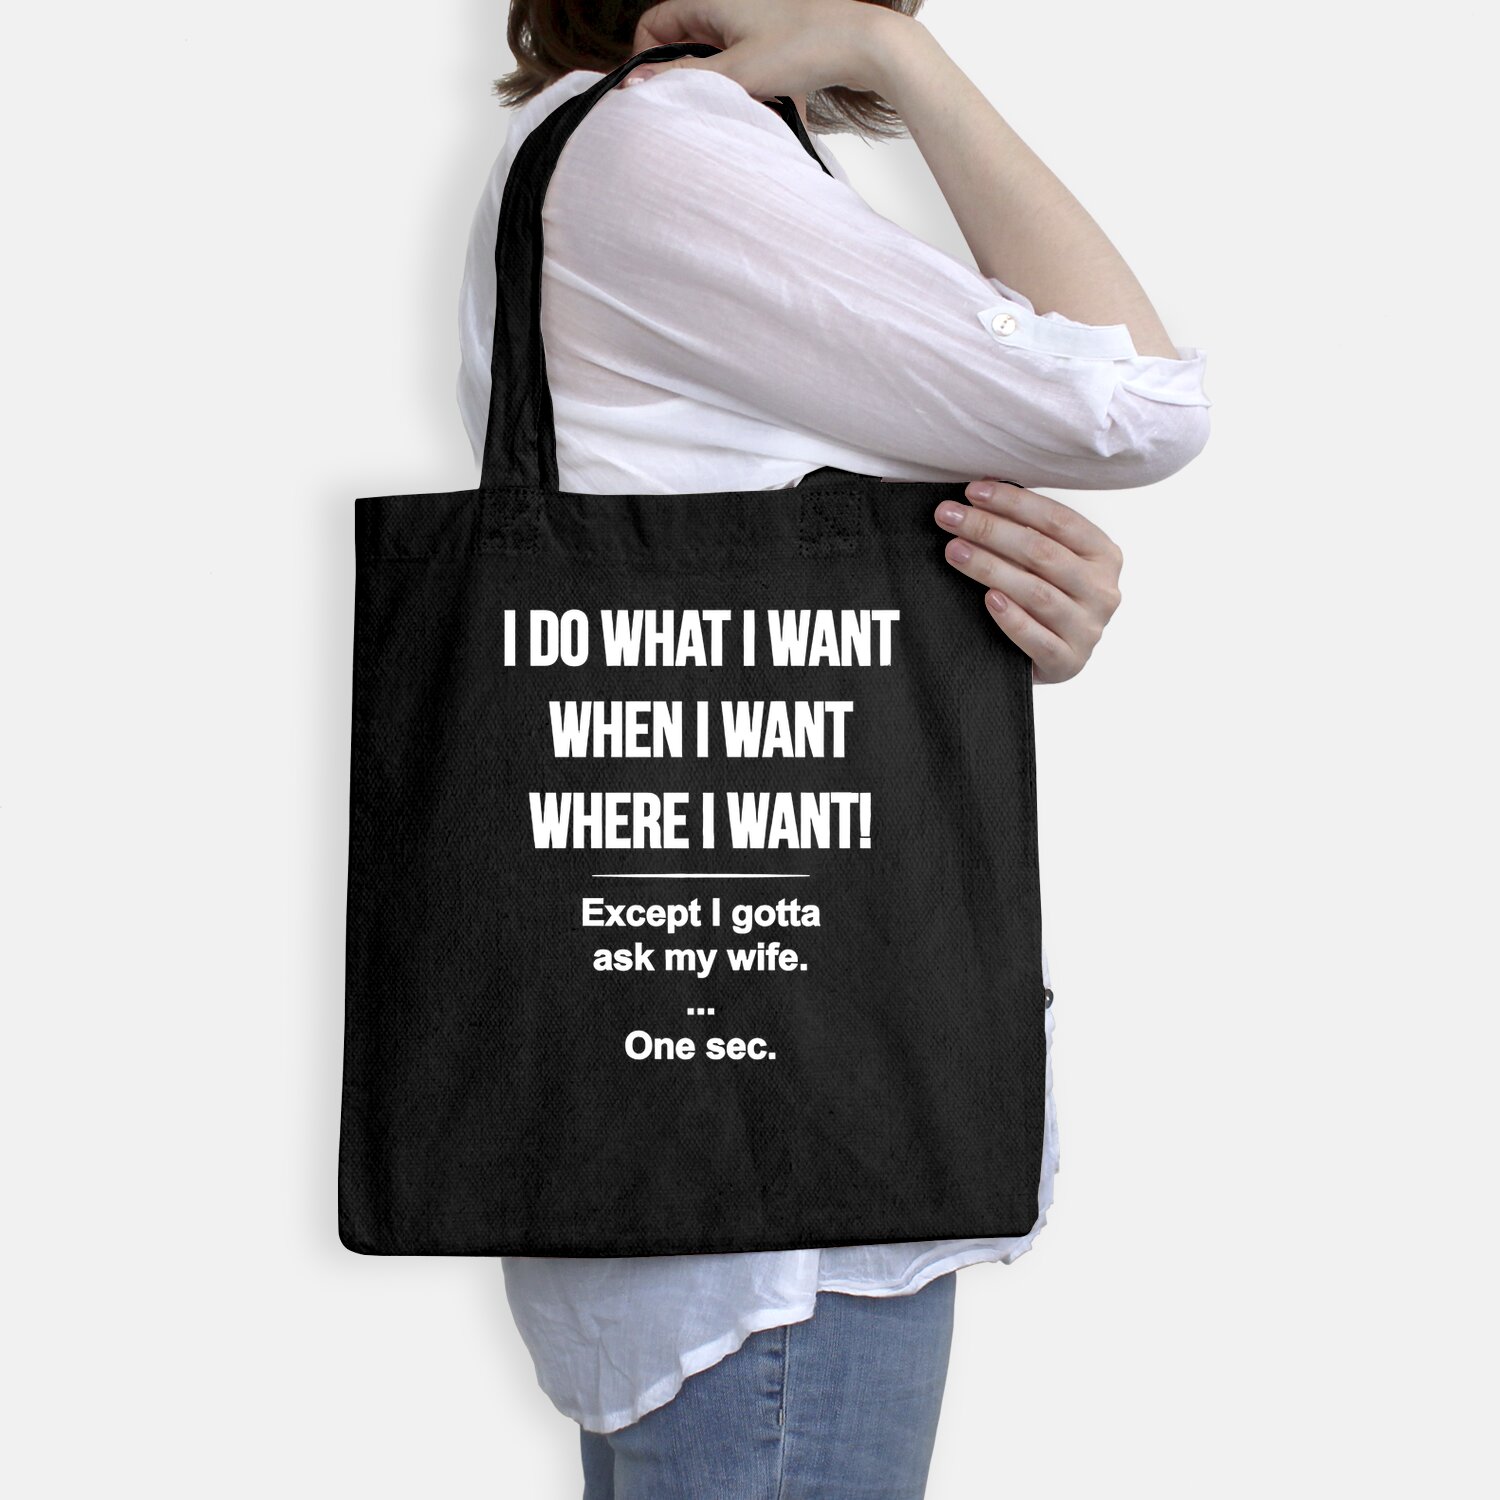 I Do What I Want When I Want Where I Want Except I Gotta Ask My Wife Tote Bag